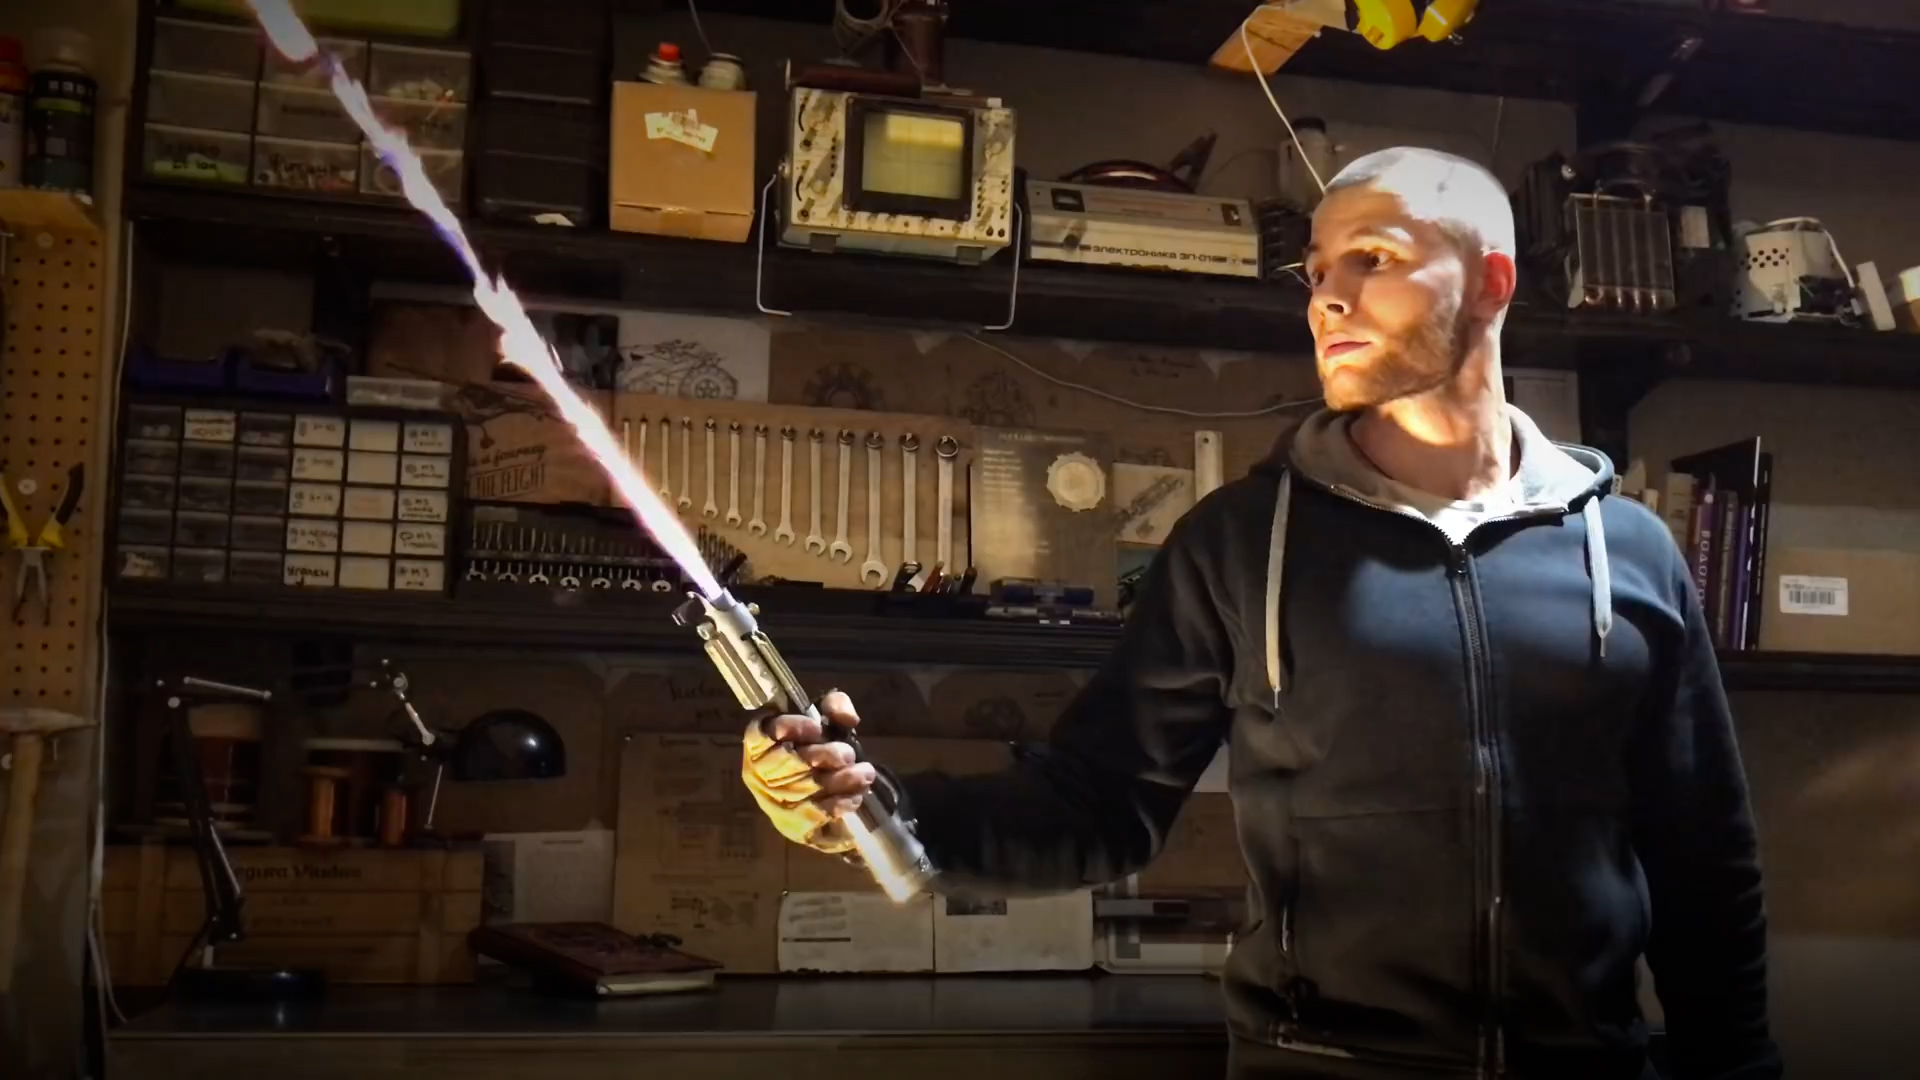 YouTuber creates world's first real-life retractable lightsaber - CNN Video